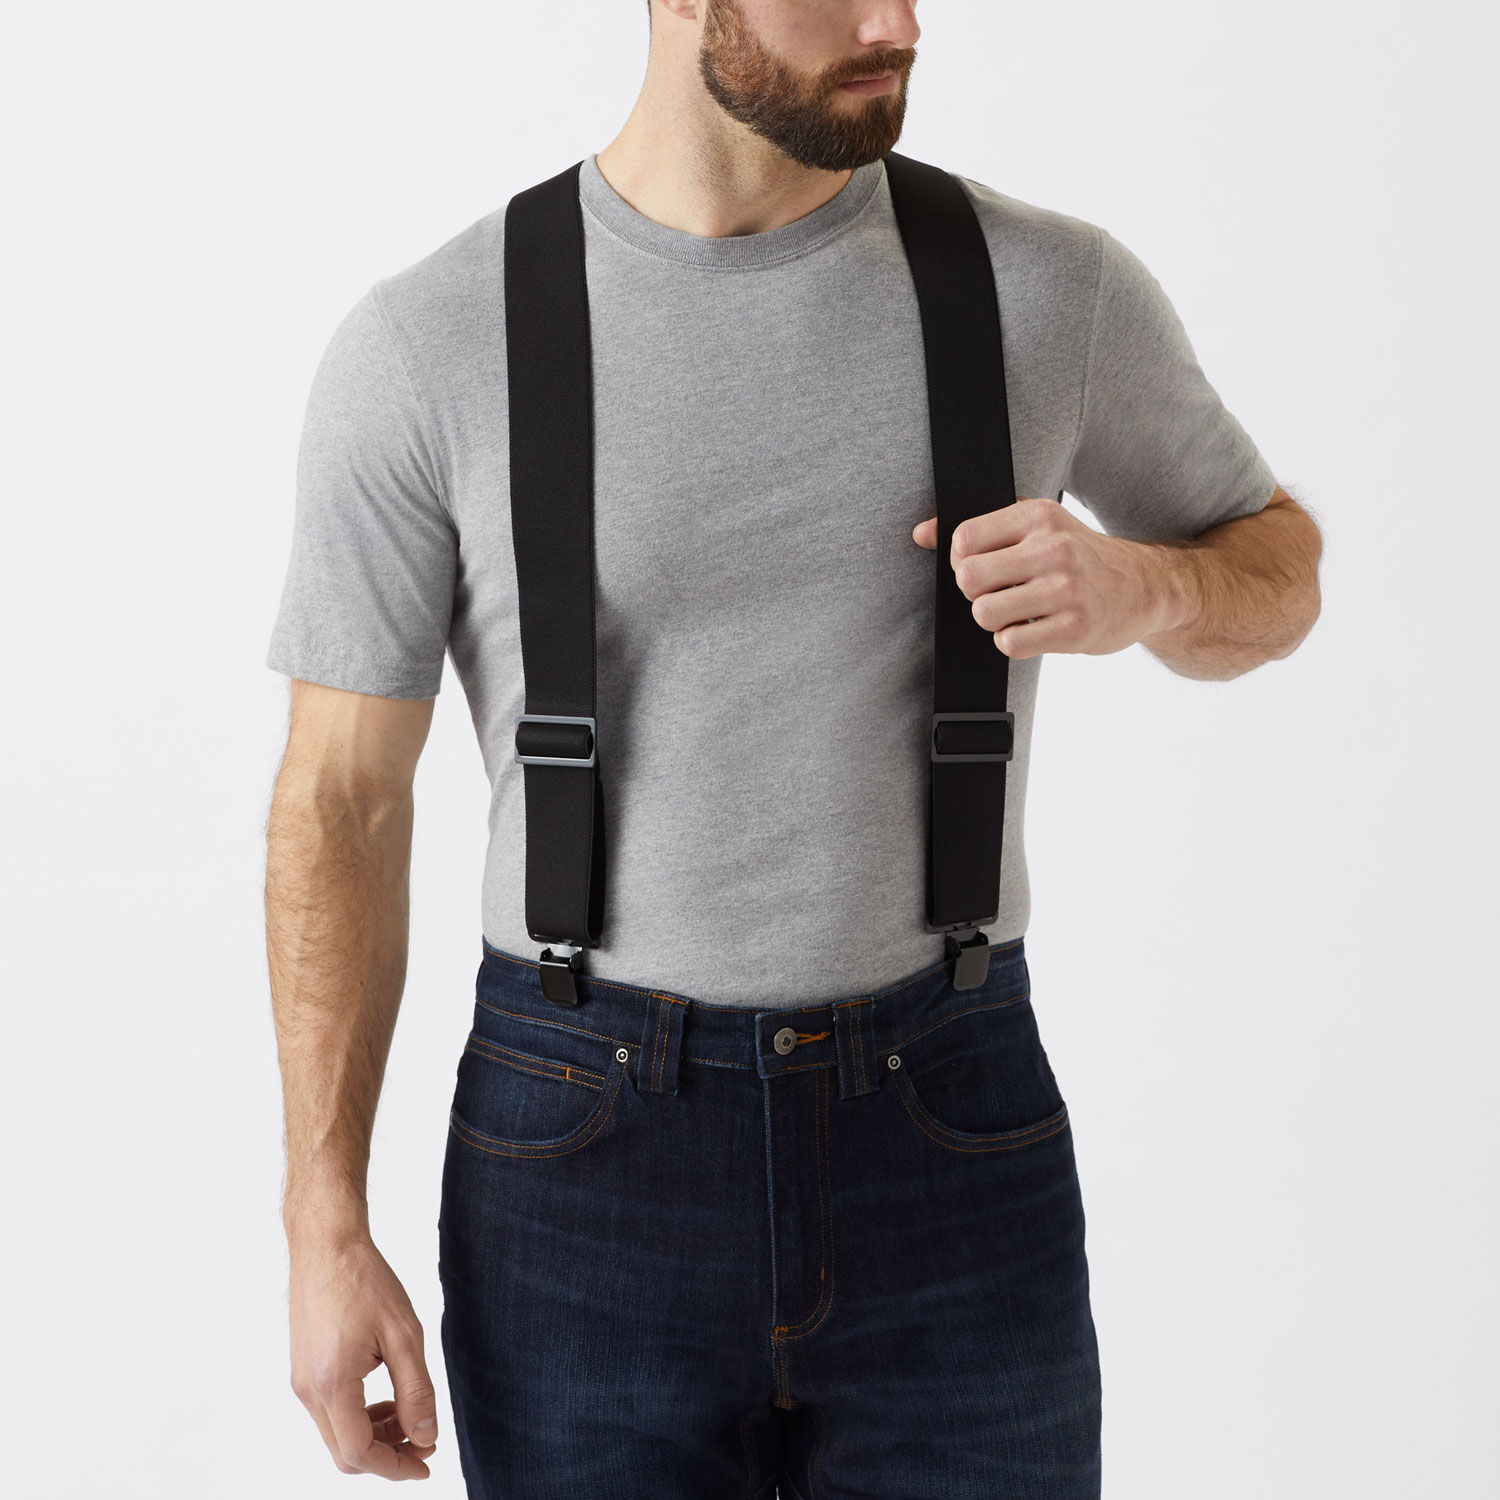 Mens Suspender with Clips Fashion Elastic for Boyfriends Suit Pants Trousers  | eBay